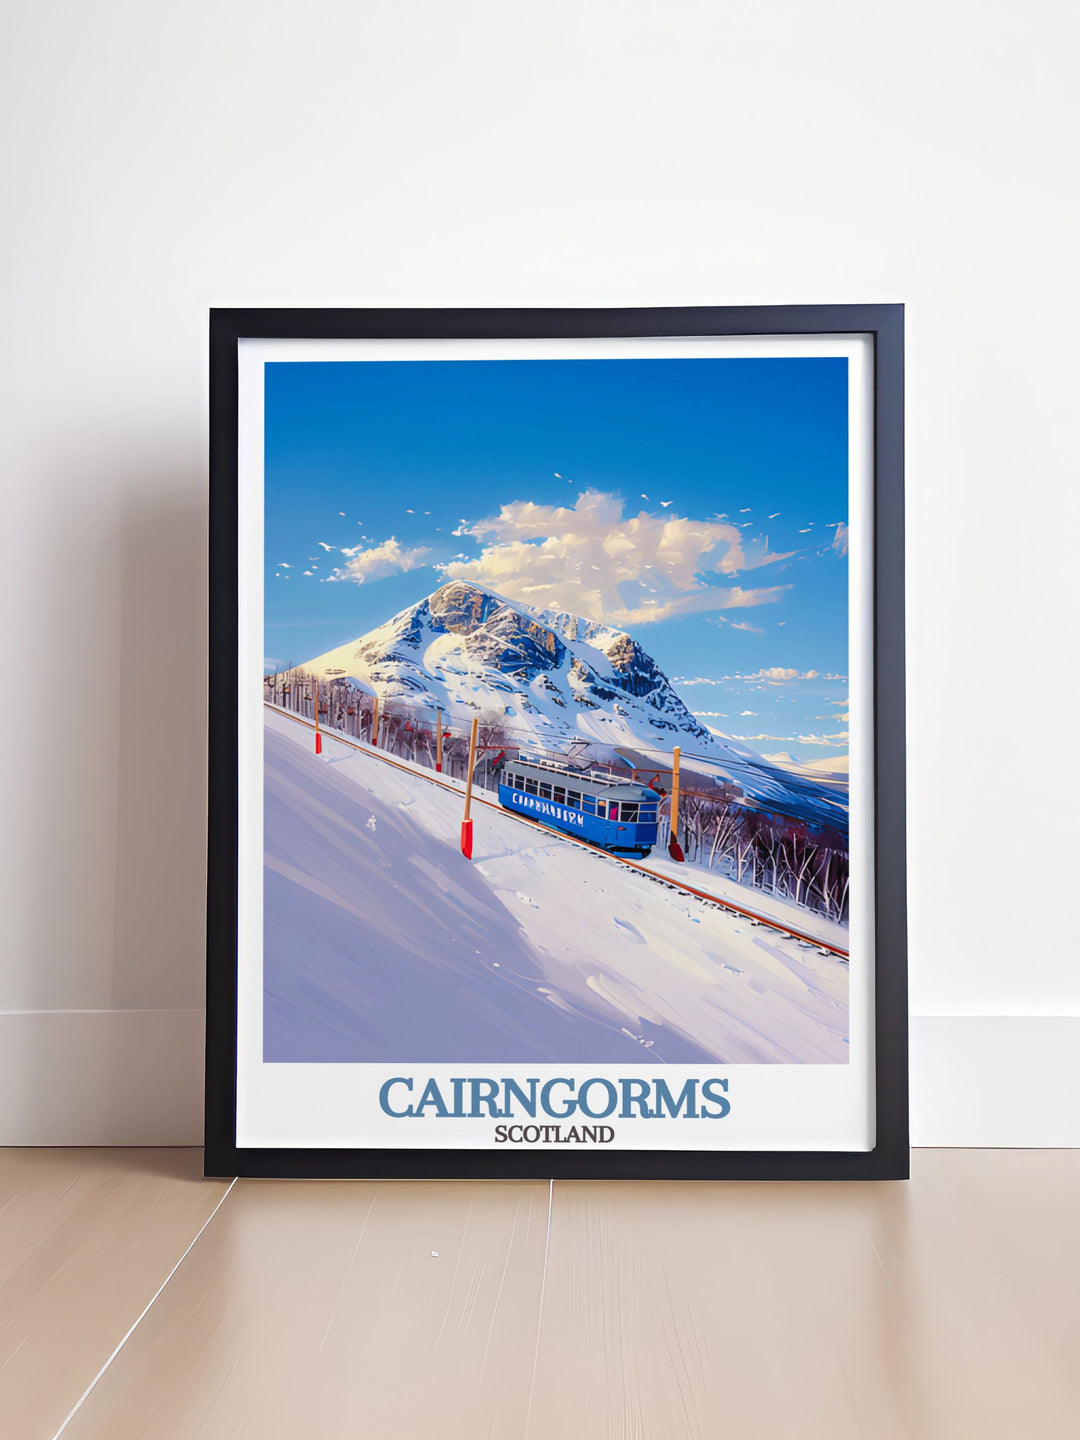 Cairngorm Mountain print highlighting the majestic scenery of the Cairngorms a perfect addition to any travel collection or wall art gallery enhances your home decor with a touch of the Scottish Highlands and offers a unique gift option for nature lovers.